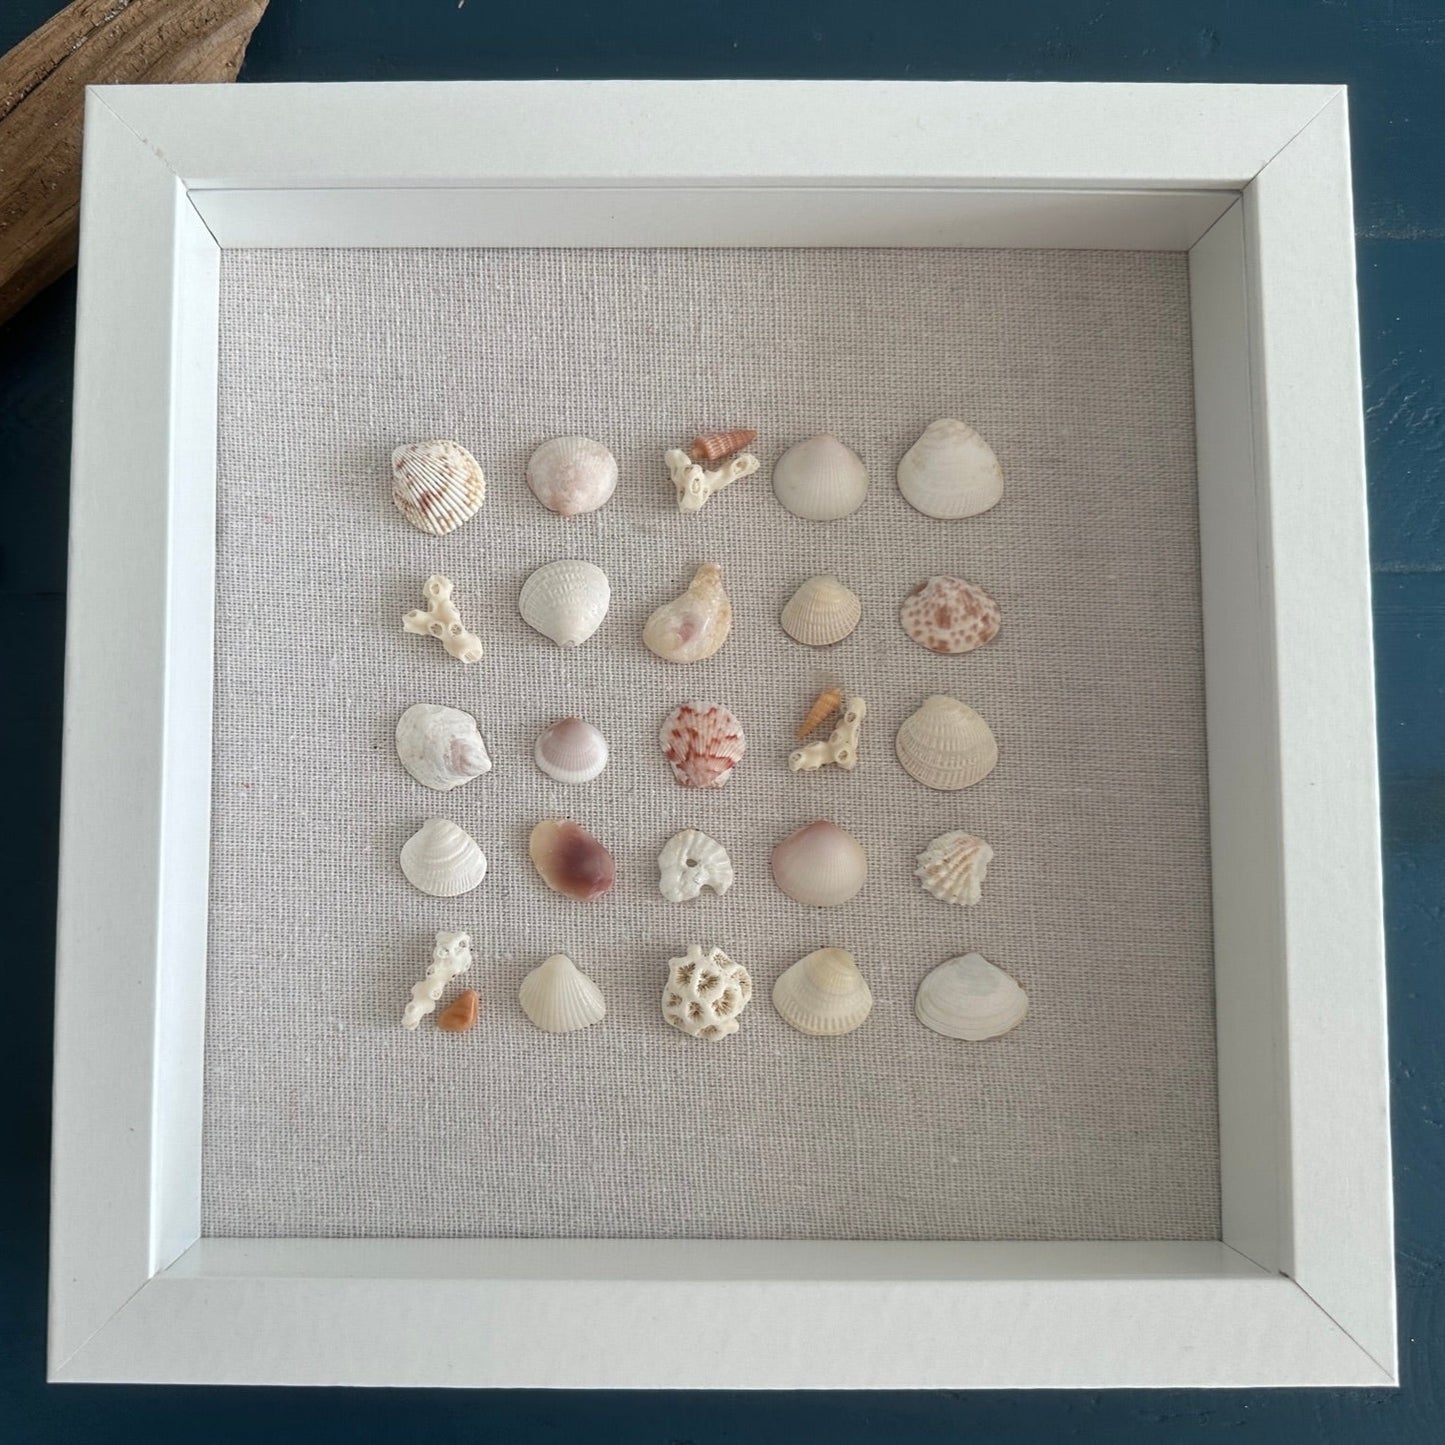 8x8 Seashell art - shells in a row top view by jacqueline mb designs 